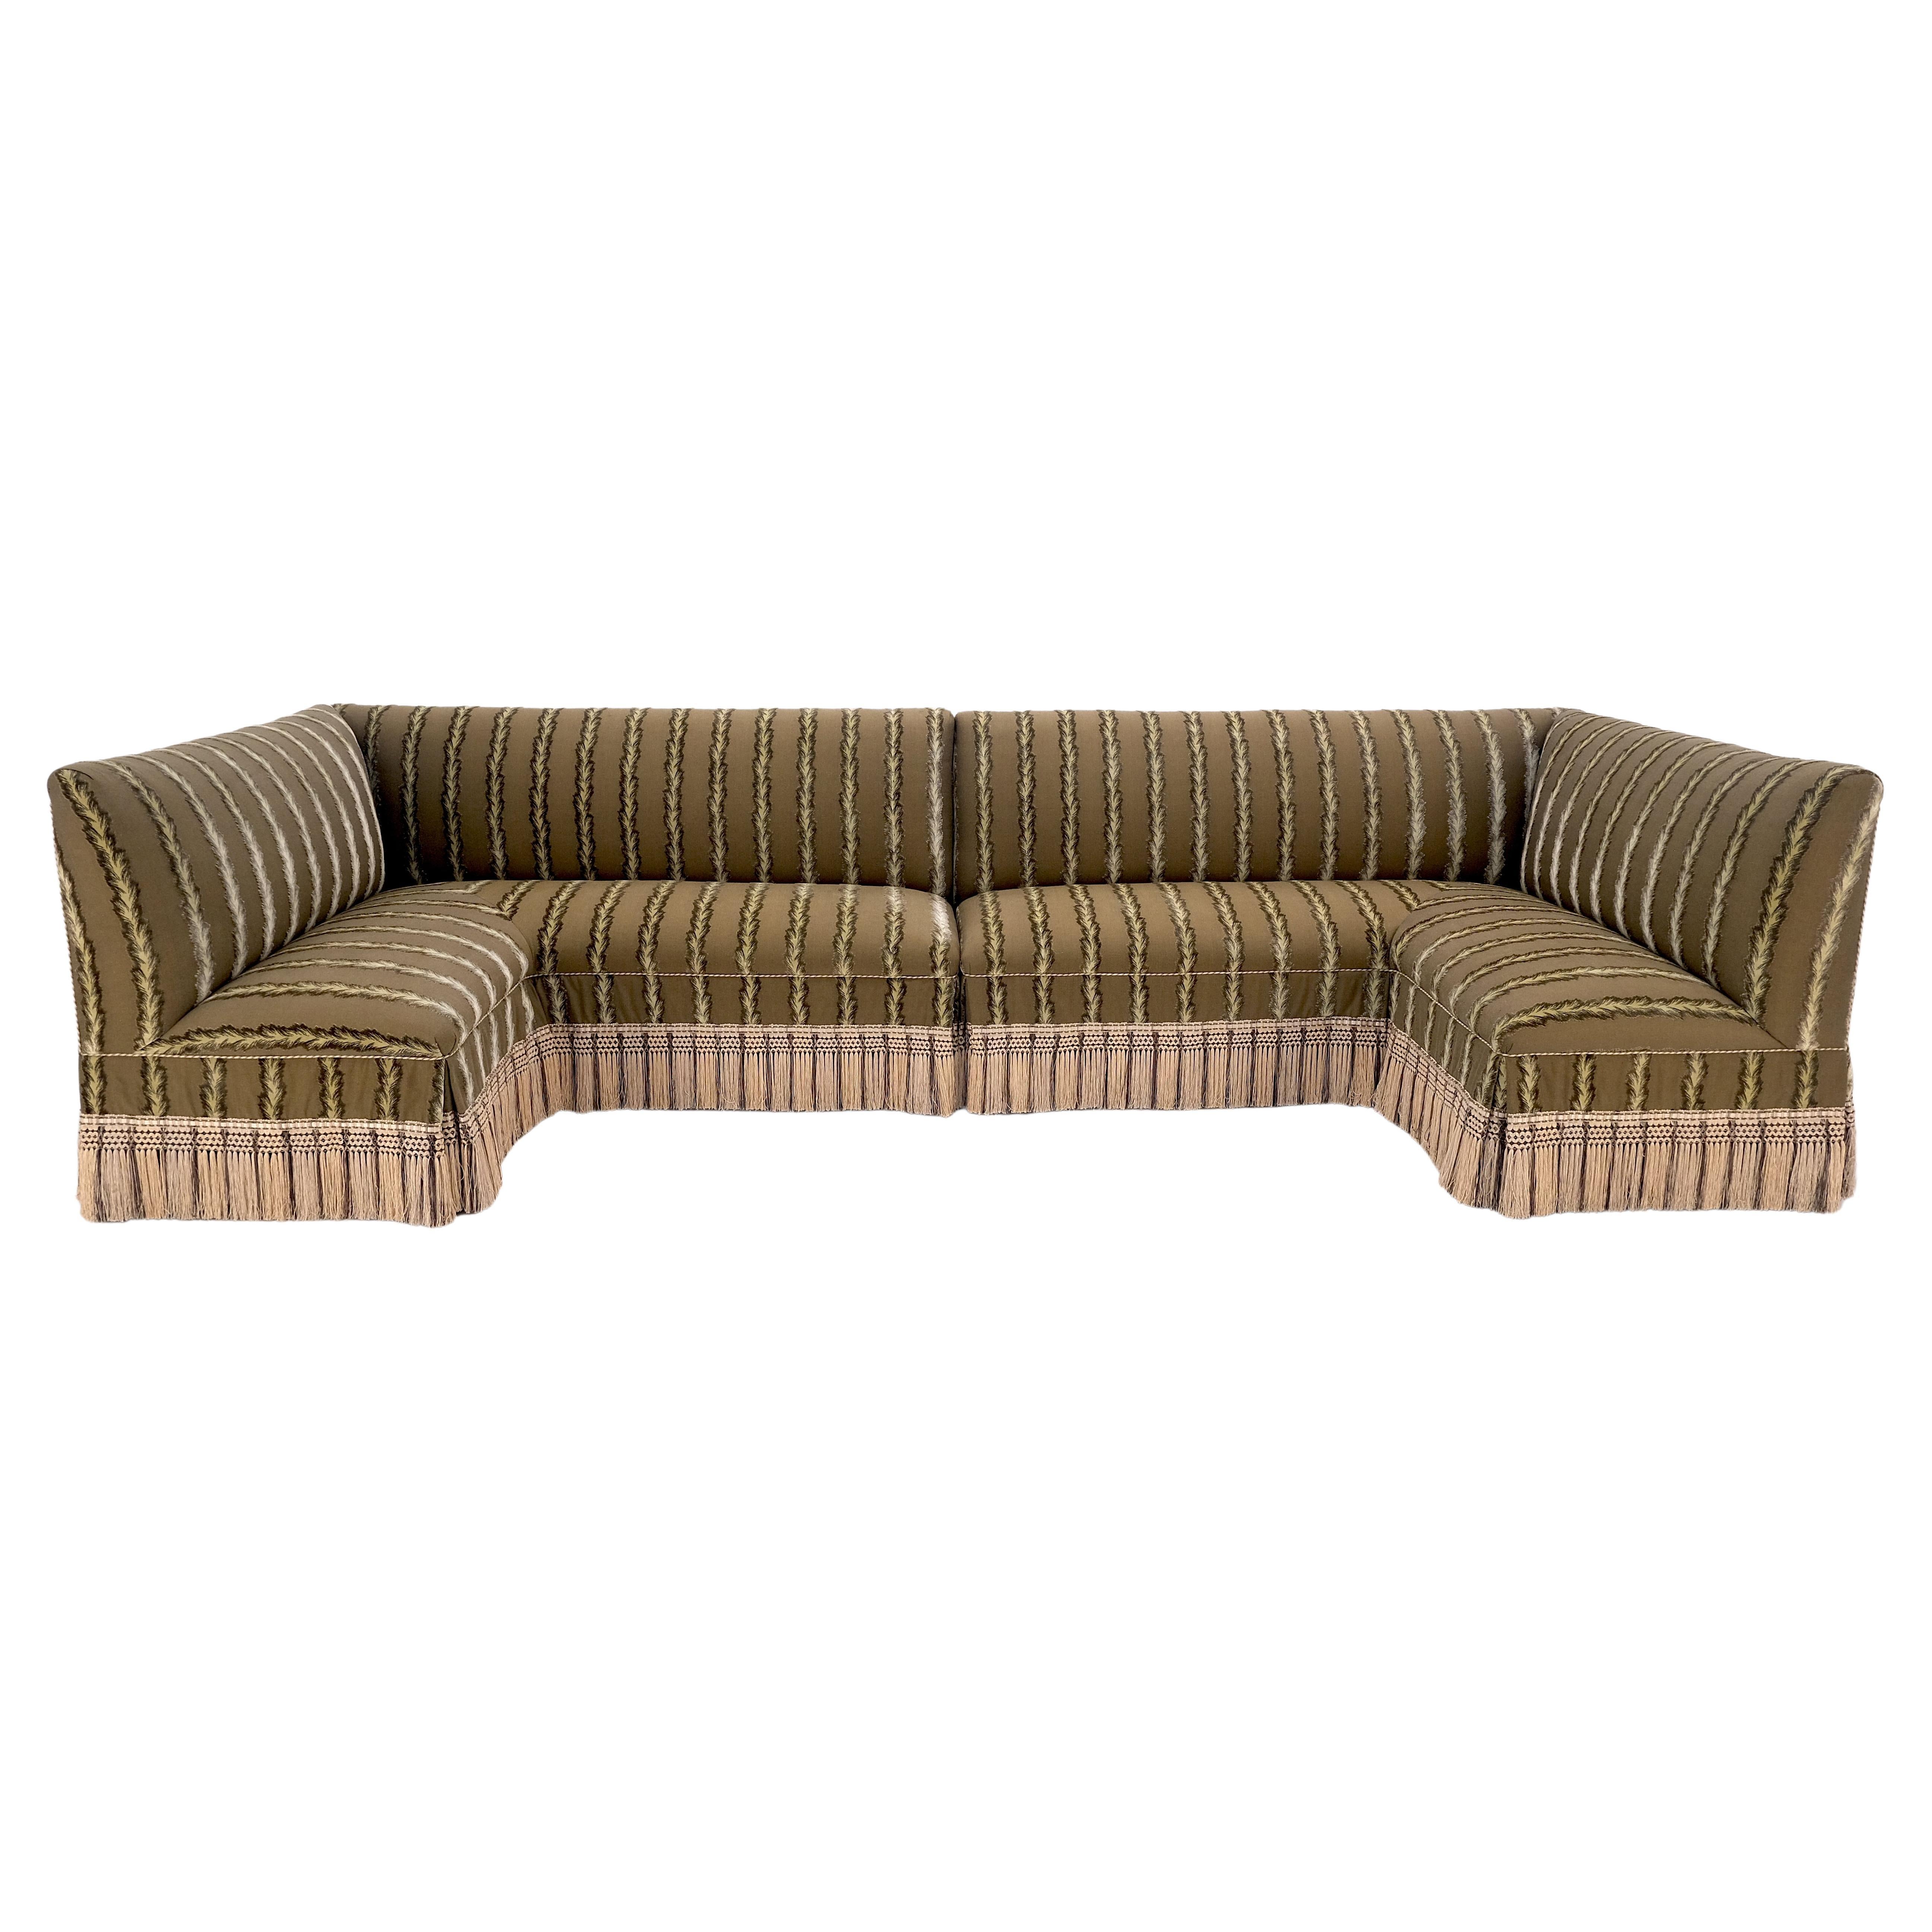 Two Way Two Part "C" Shape Striped Upholstery Custom Sofa Couch w/ Tassels MINT! For Sale